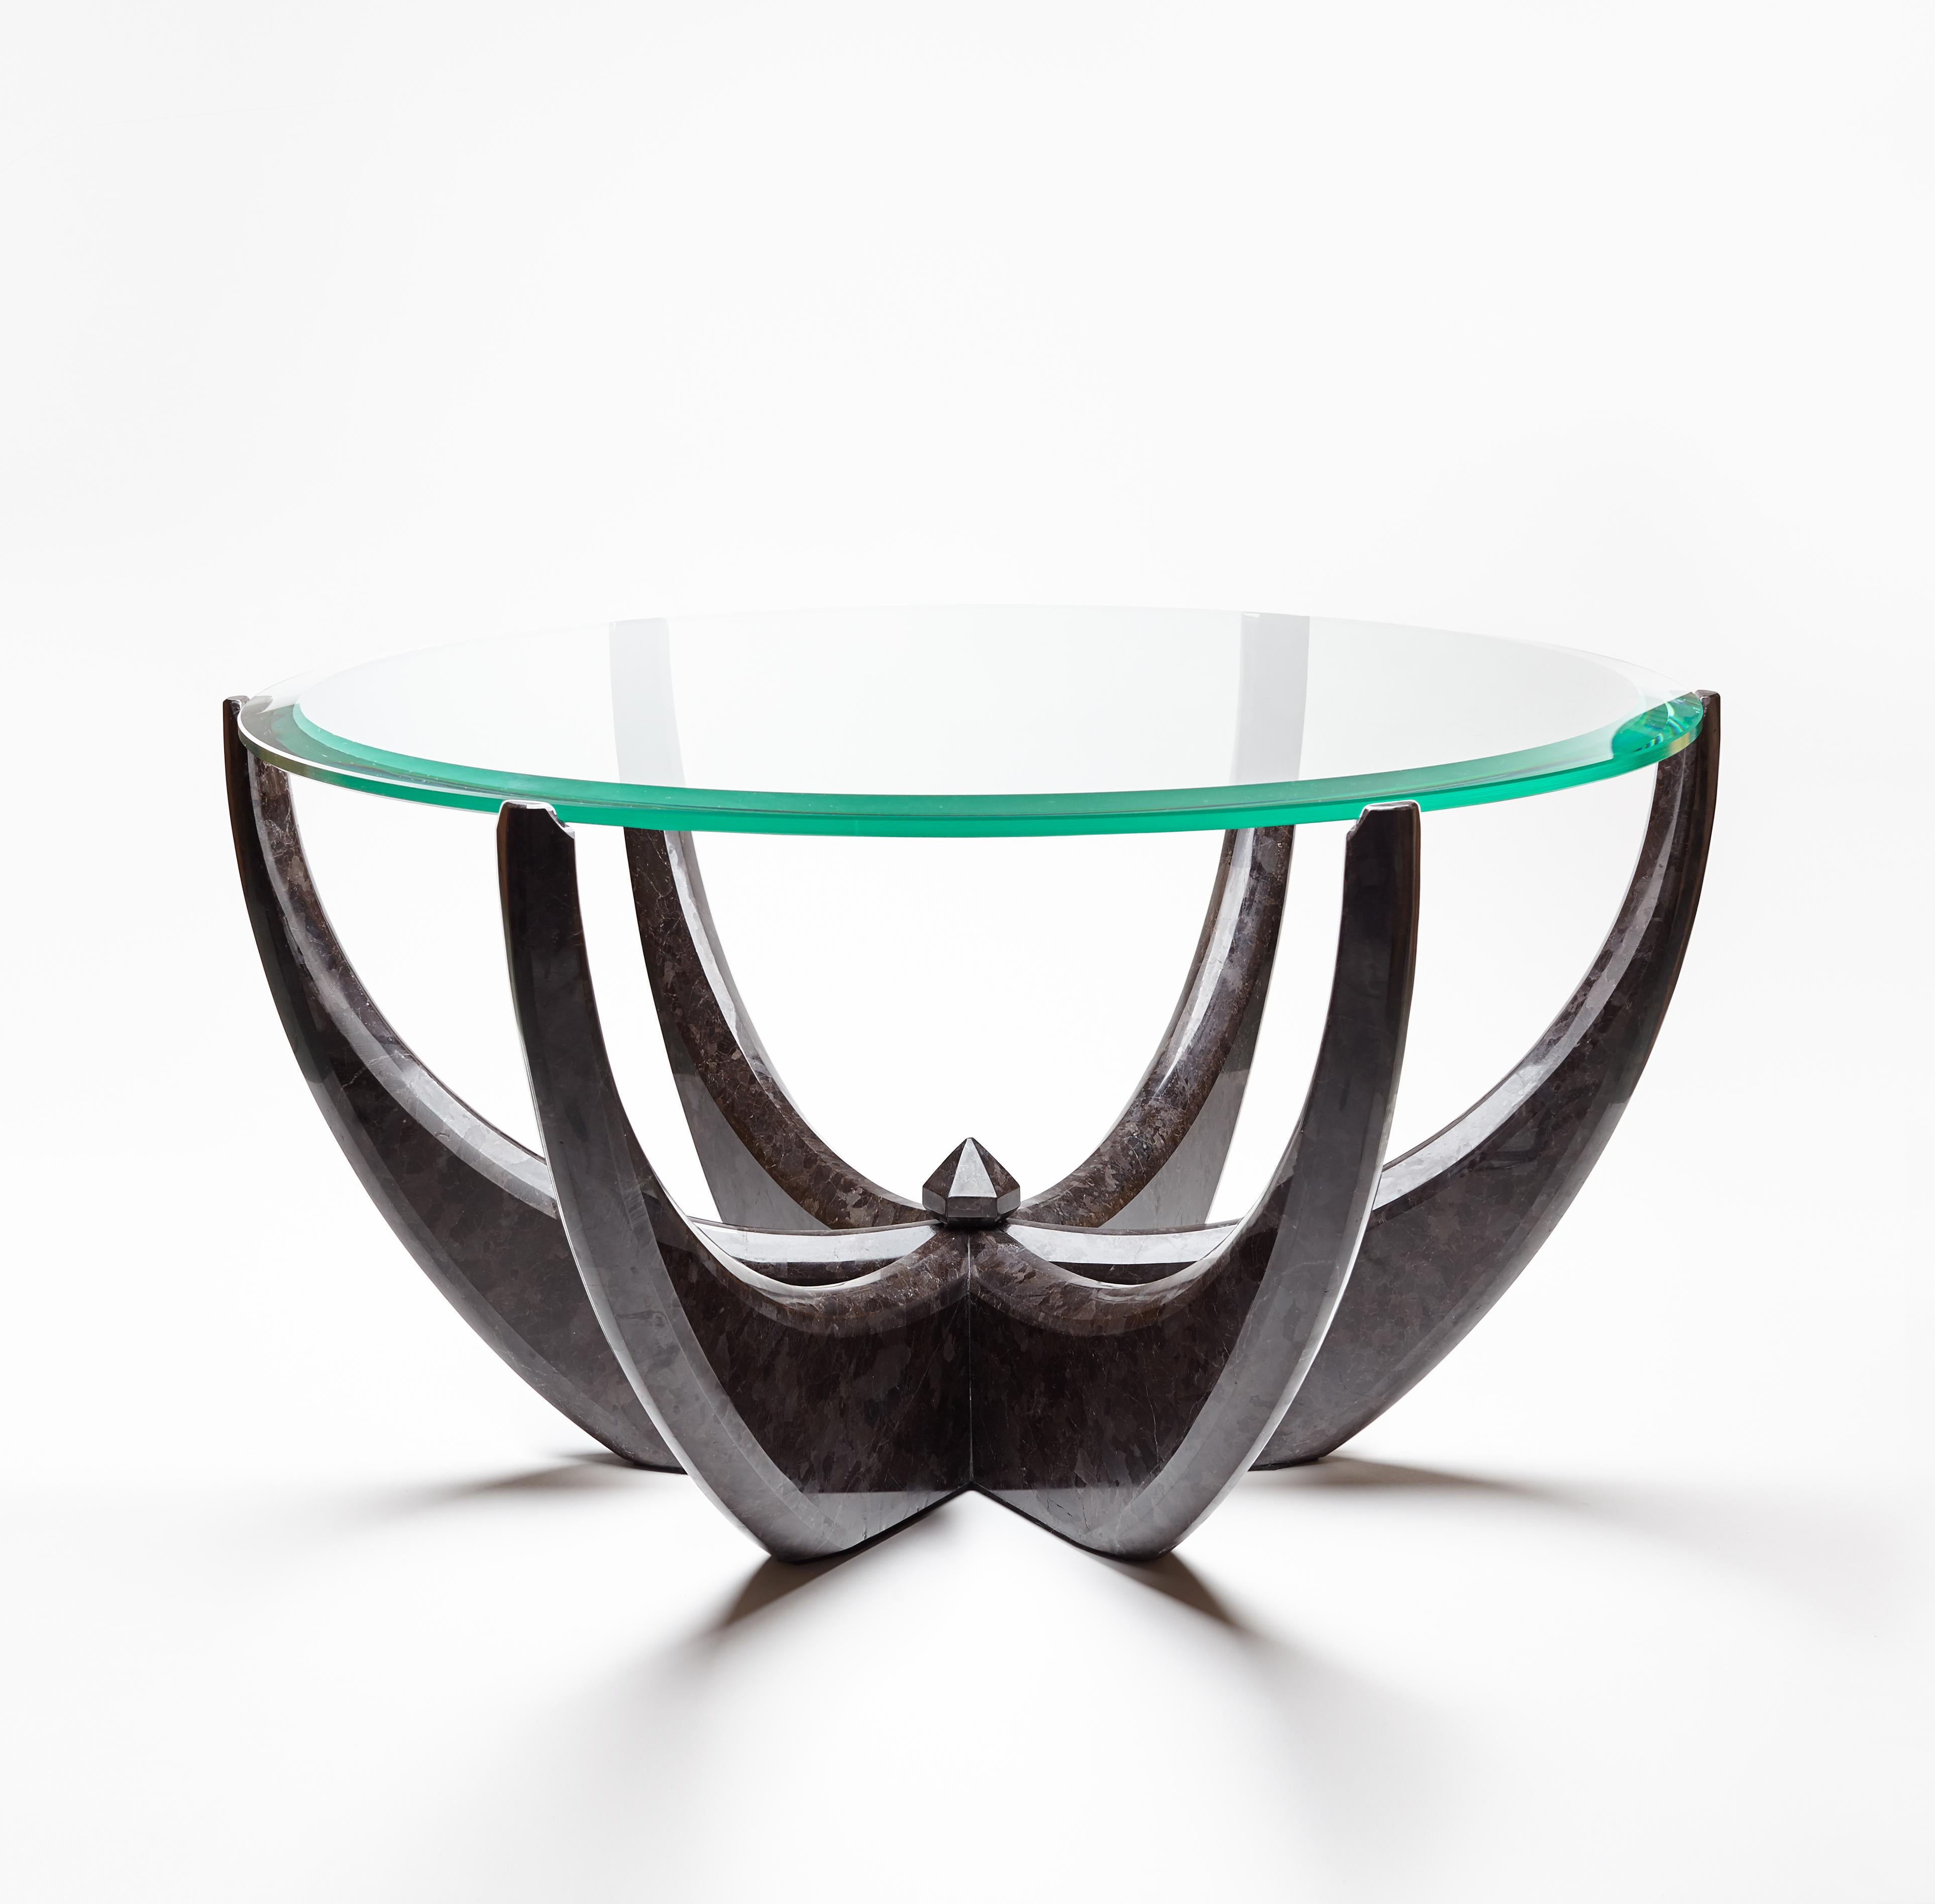 The diamond ring center table, 1 of 1 by Grzegorz Majka
Edition 1 of 1
Dimensions: 31.50 x 31.50 x 17.72 in
Materials: glass top. Marble onyx base. 


The Diamond collection proves that everything is possible. It goes beyond the stereotypical